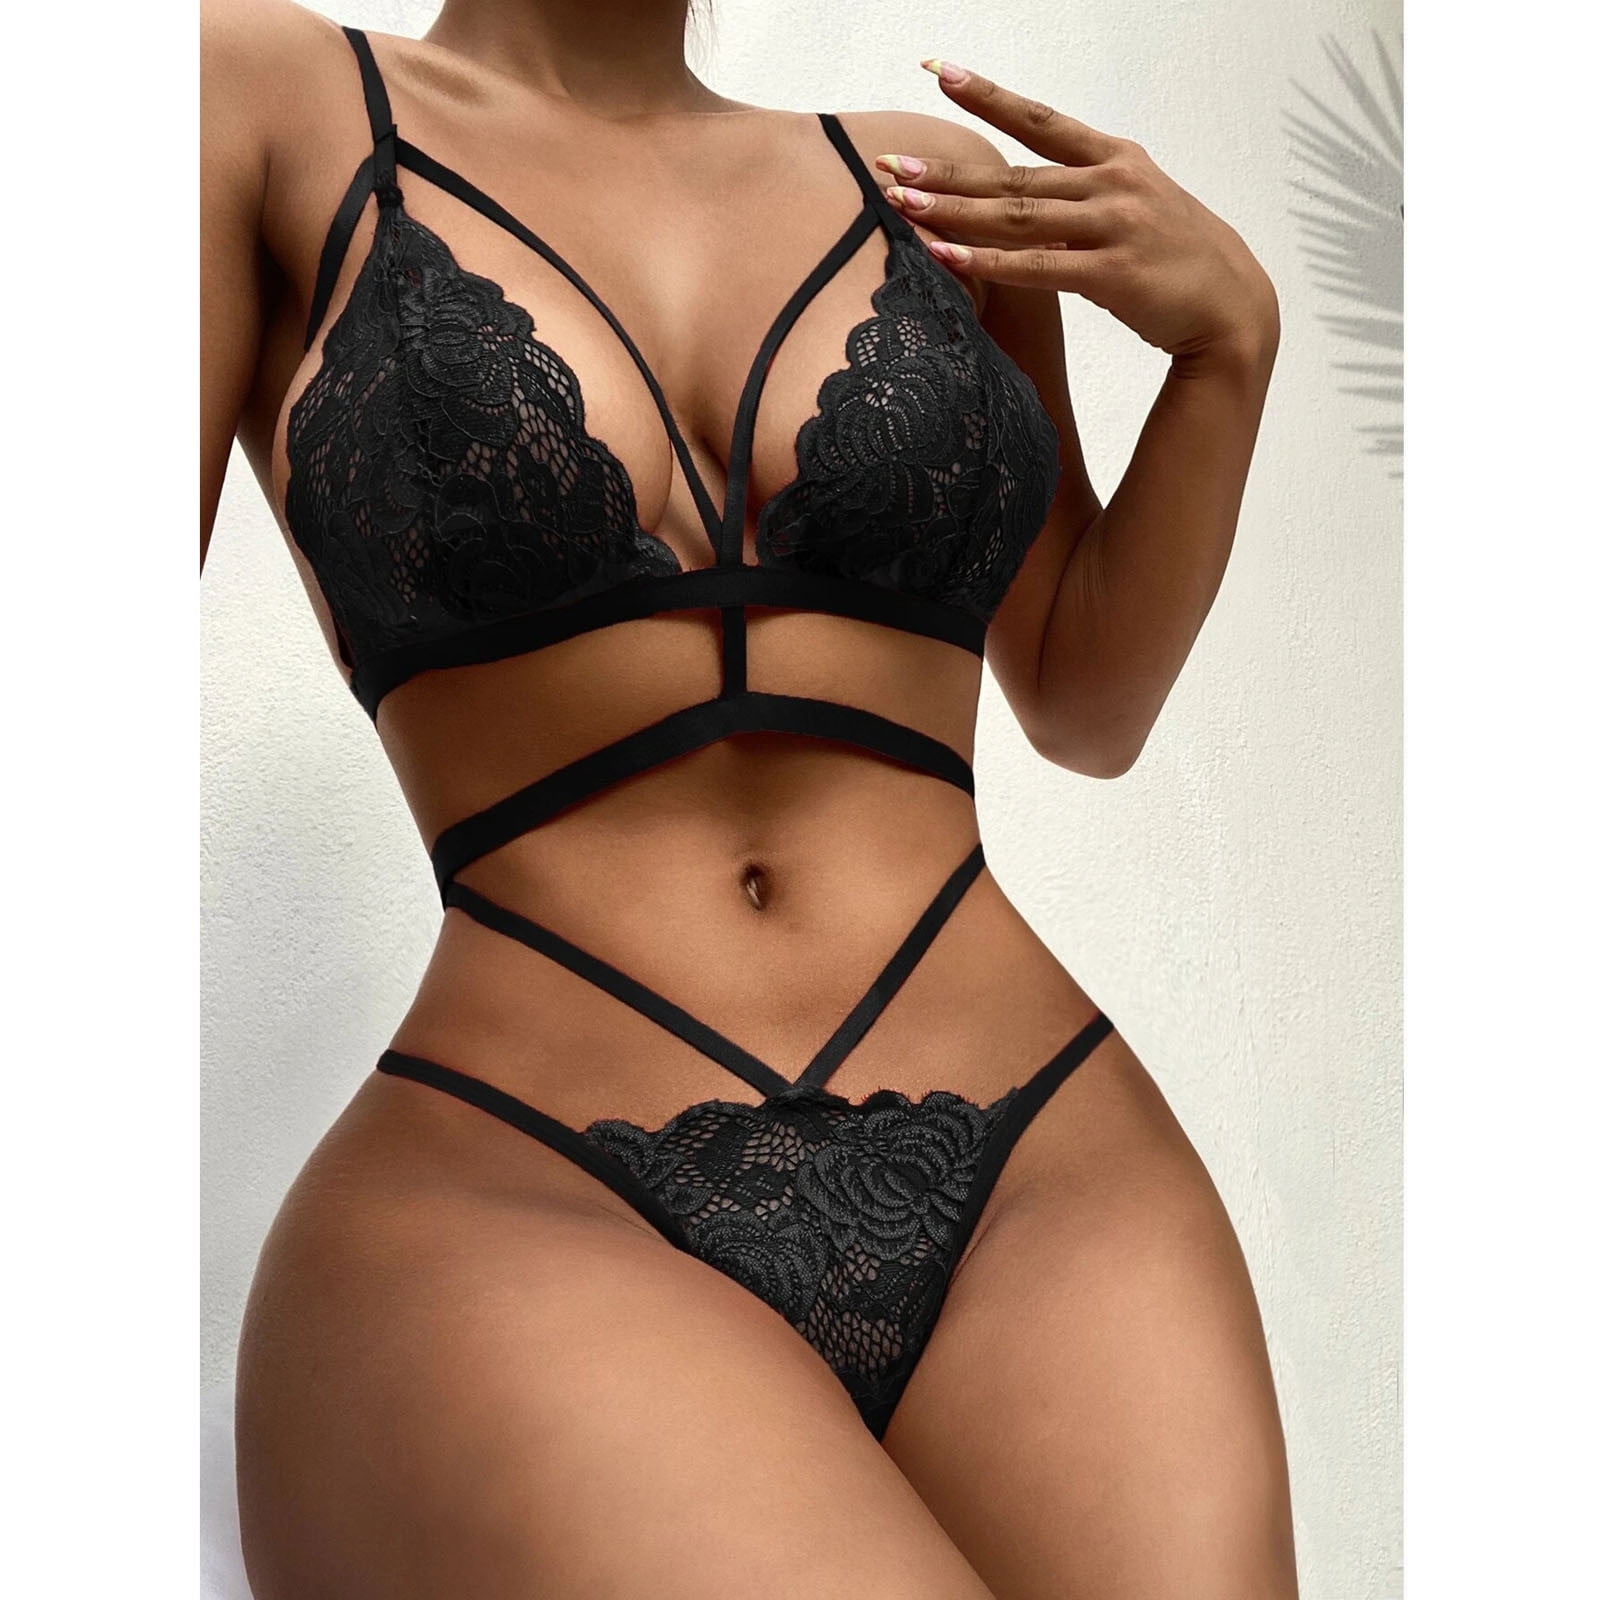 Hesxuno Sexy Women Lace Lingerie Solid Hollow Out Temptation Babydoll  Underwear Underpants Thong Panties Sleepwear Suit 